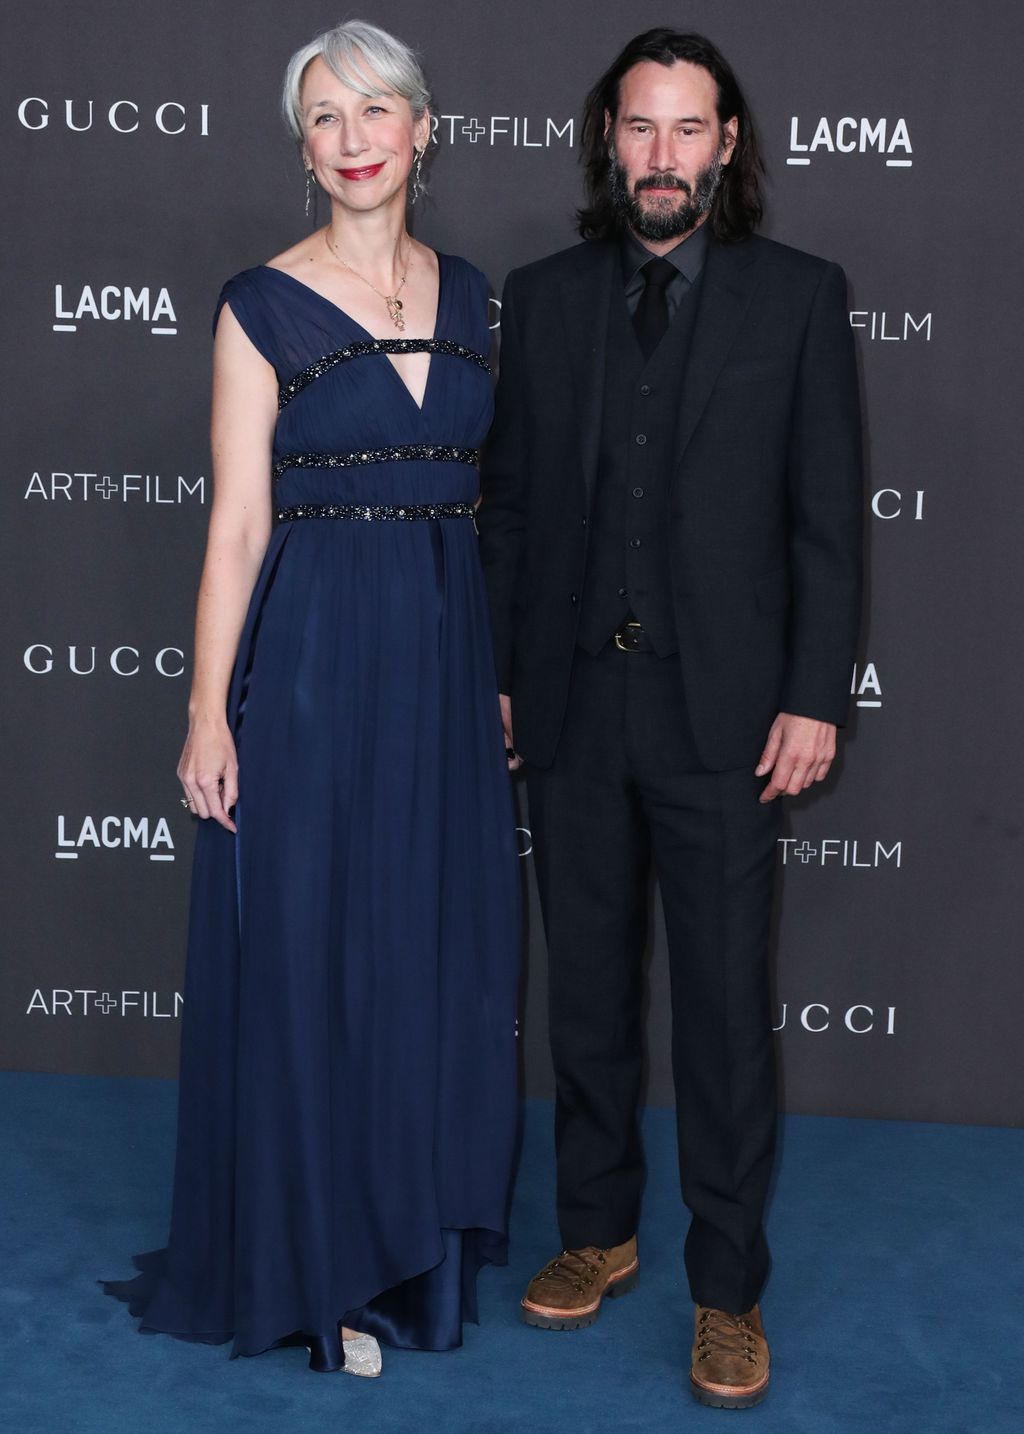 2019 LACMA Art + Film Gala USA United States IDSOK America NurPhoto California CA LA West Coast Los Angeles County CITY Hollywood Miracle Mile Arts Culture ENTERTAINMENT Editorial EVENT RED CARPET ARRIVAL Attending Celebrities CELEBRITY Posing VERTICAL PO